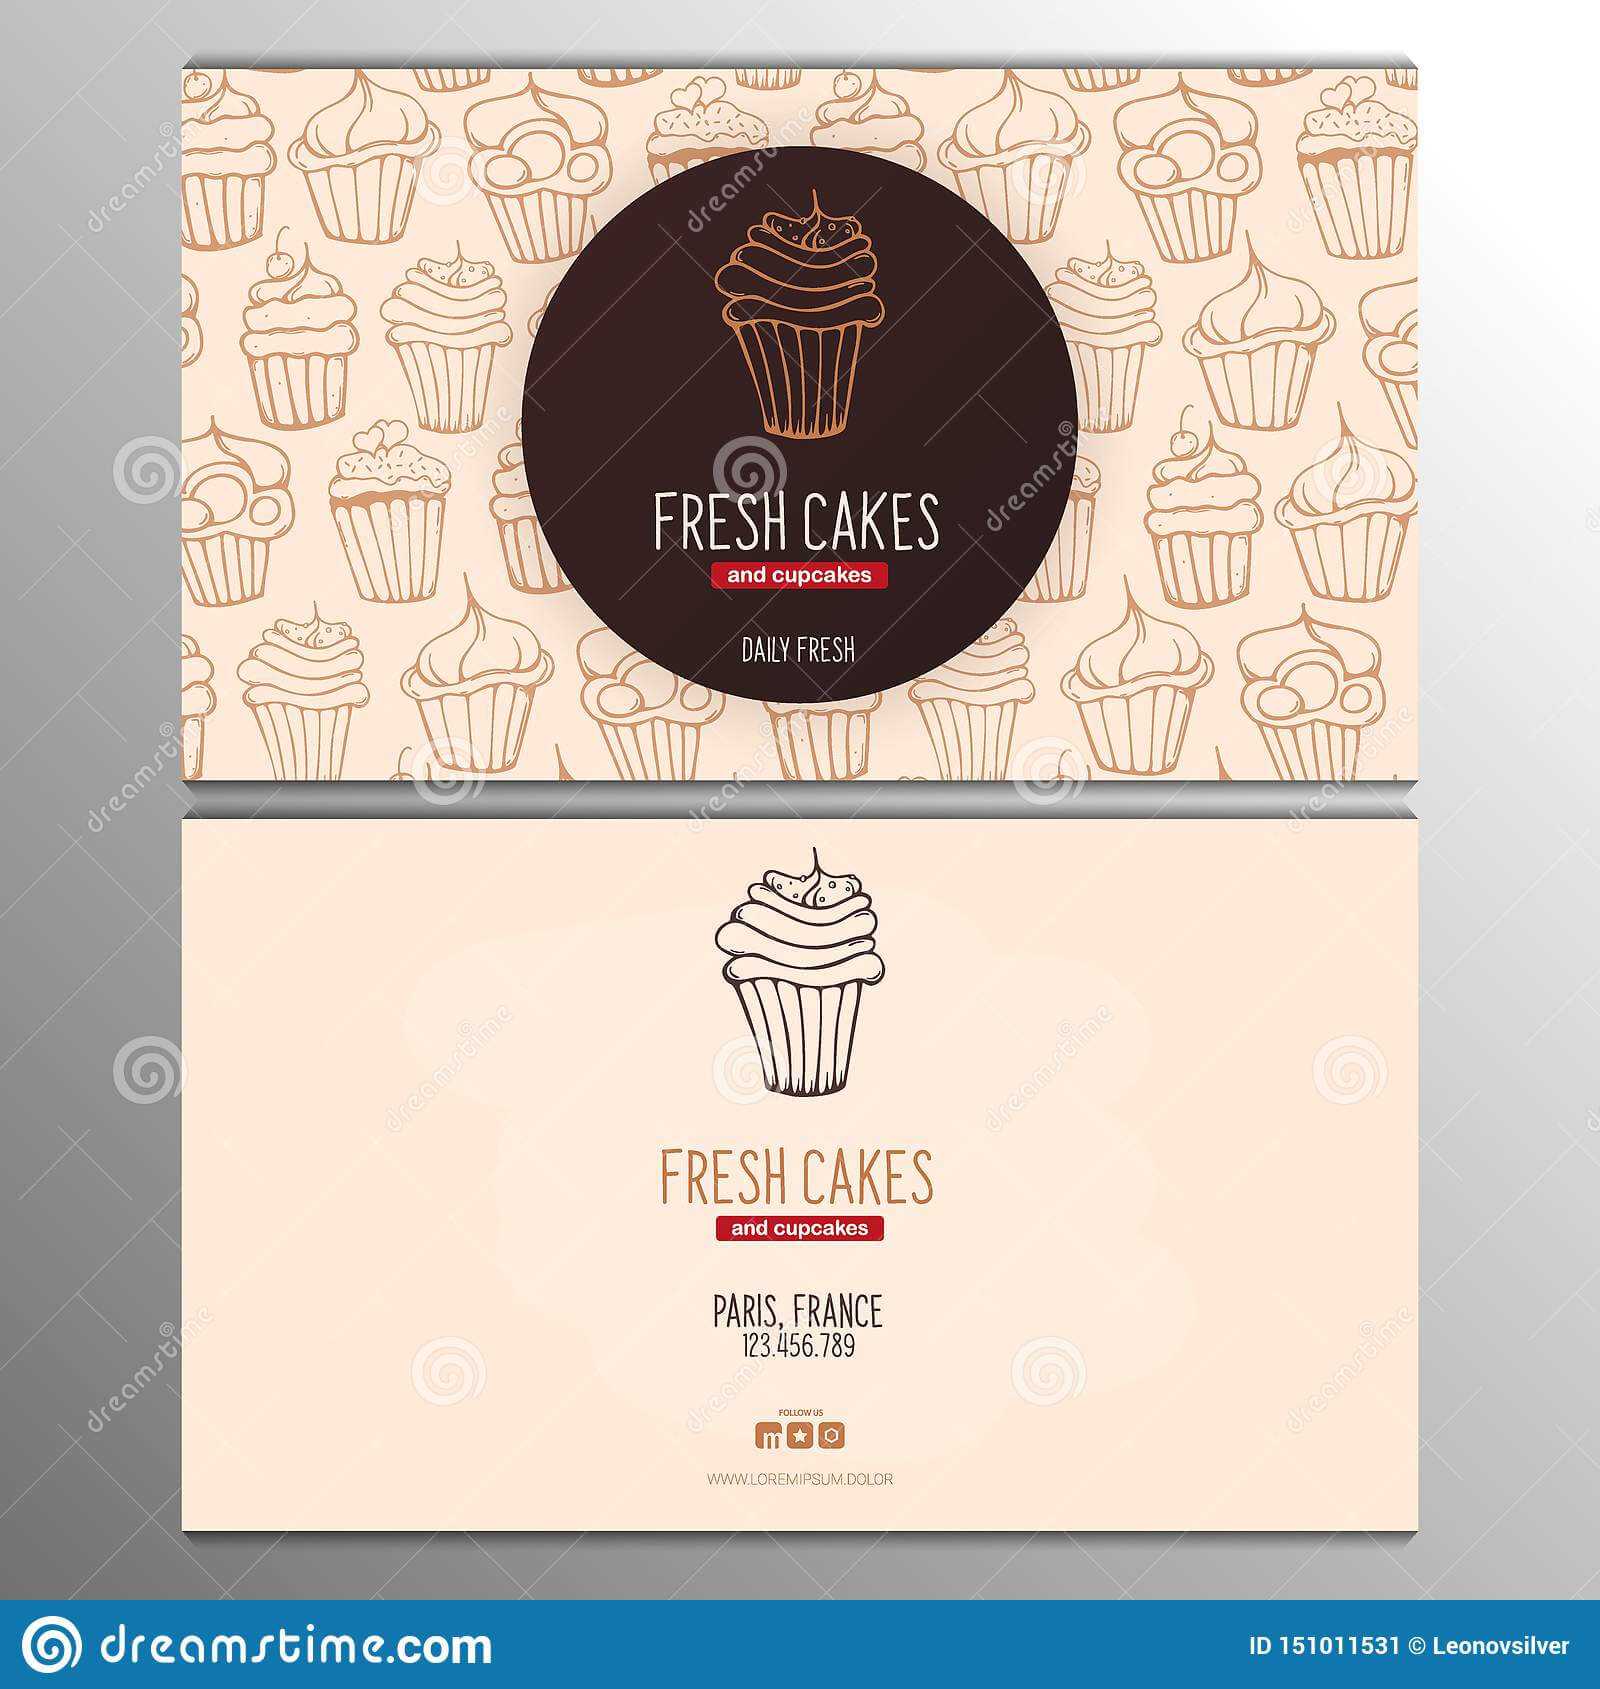 cake-business-card-cake-business-cards-free-business-card-templates